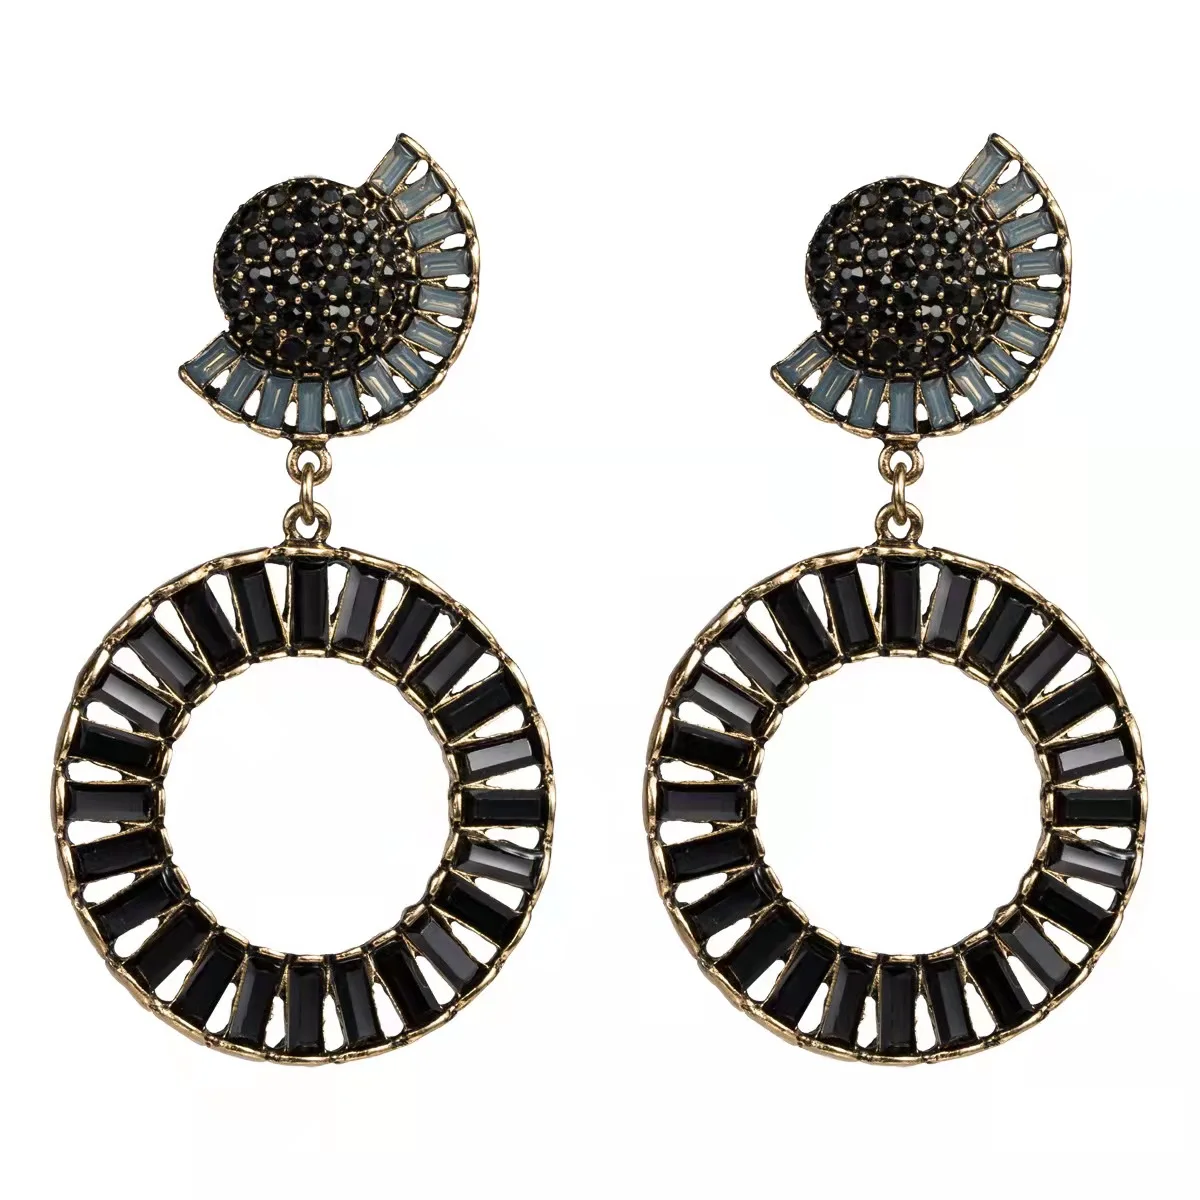 

New exaggerated half-moon round acrylic diamonds earrings women, Picture shows